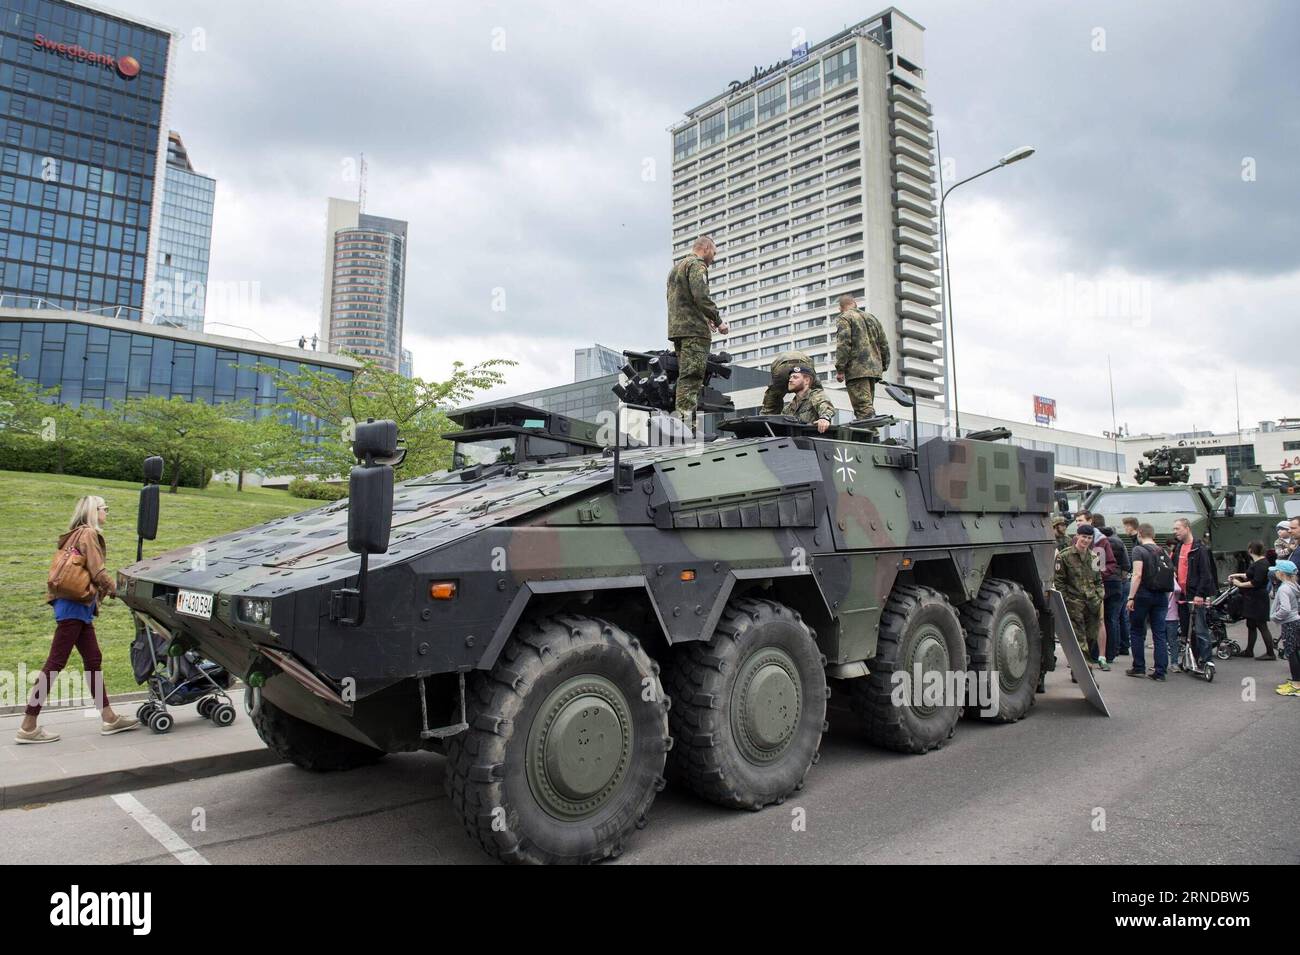 (160515) -- VILNIUS, May 14, 2016 -- People are viewing the military vehicles in Vilnius, Lithuania, May 14, 2016. Lithuania celebrates Armed Forces and Public Unity Day in it s captial on Saturday. Troops of Lithuania, Germany, U.S., Luxembourg, Portugal, etc. brought their light weapons, military vehicles and other equipment to the public. Fighting Falcon F-16 of Portuguese air force and Black Hawk of the U.S. air force participated in the performance. ) LITHUANIA-VILNIUS-ARMED FORCES AND PUBLIC UNITY DAY AlfredasxPliadis PUBLICATIONxNOTxINxCHN   160515 Vilnius May 14 2016 Celebrities are VI Stock Photo